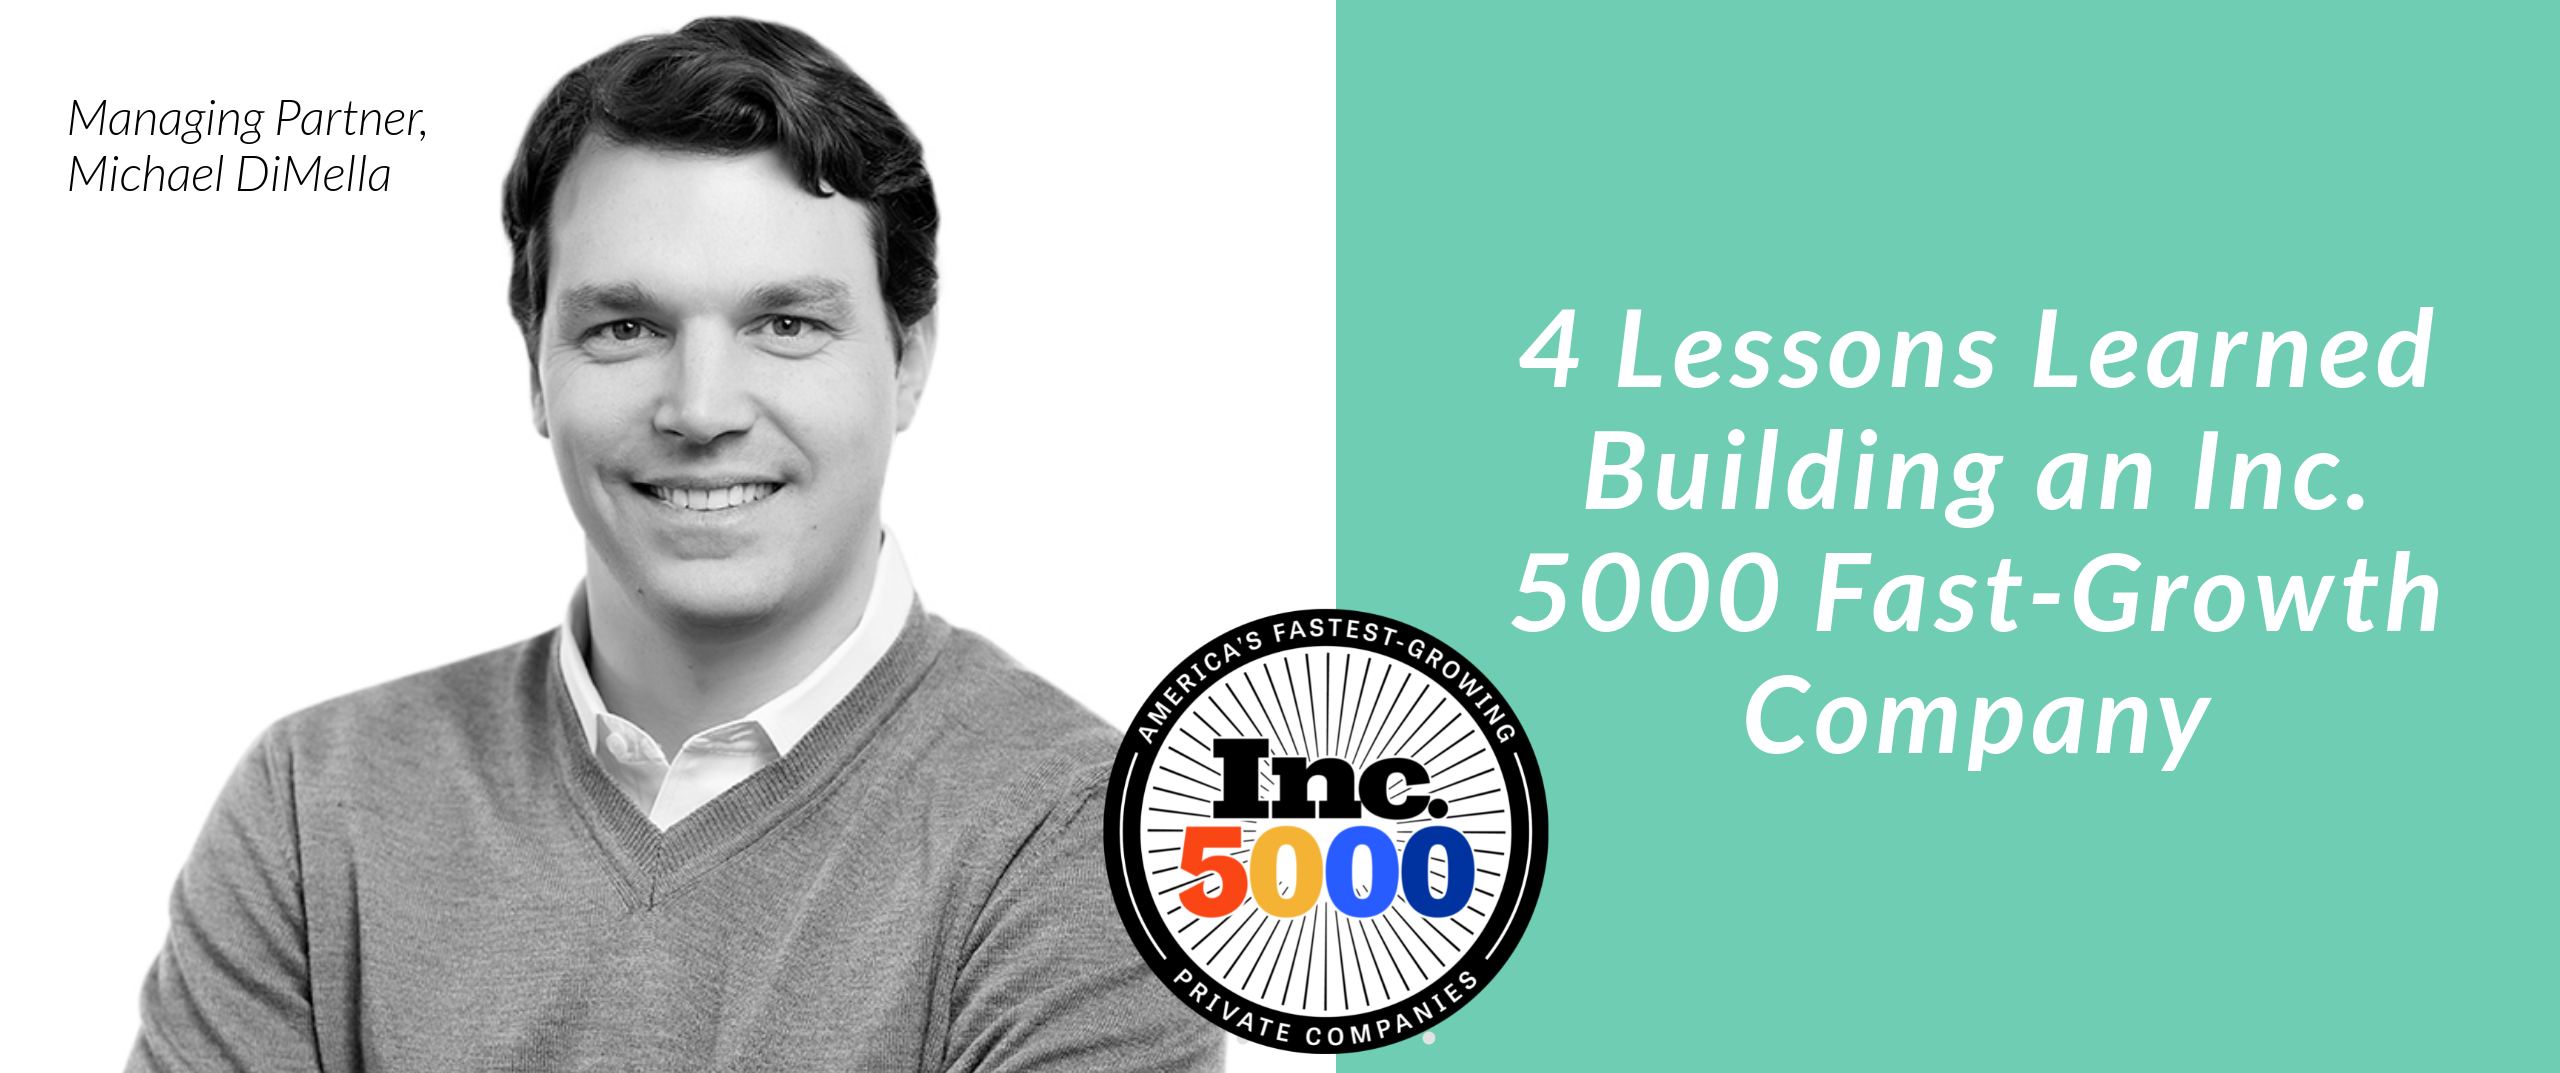 4 Lessons Learned Building an Inc. 5000 Fast-Growth Company